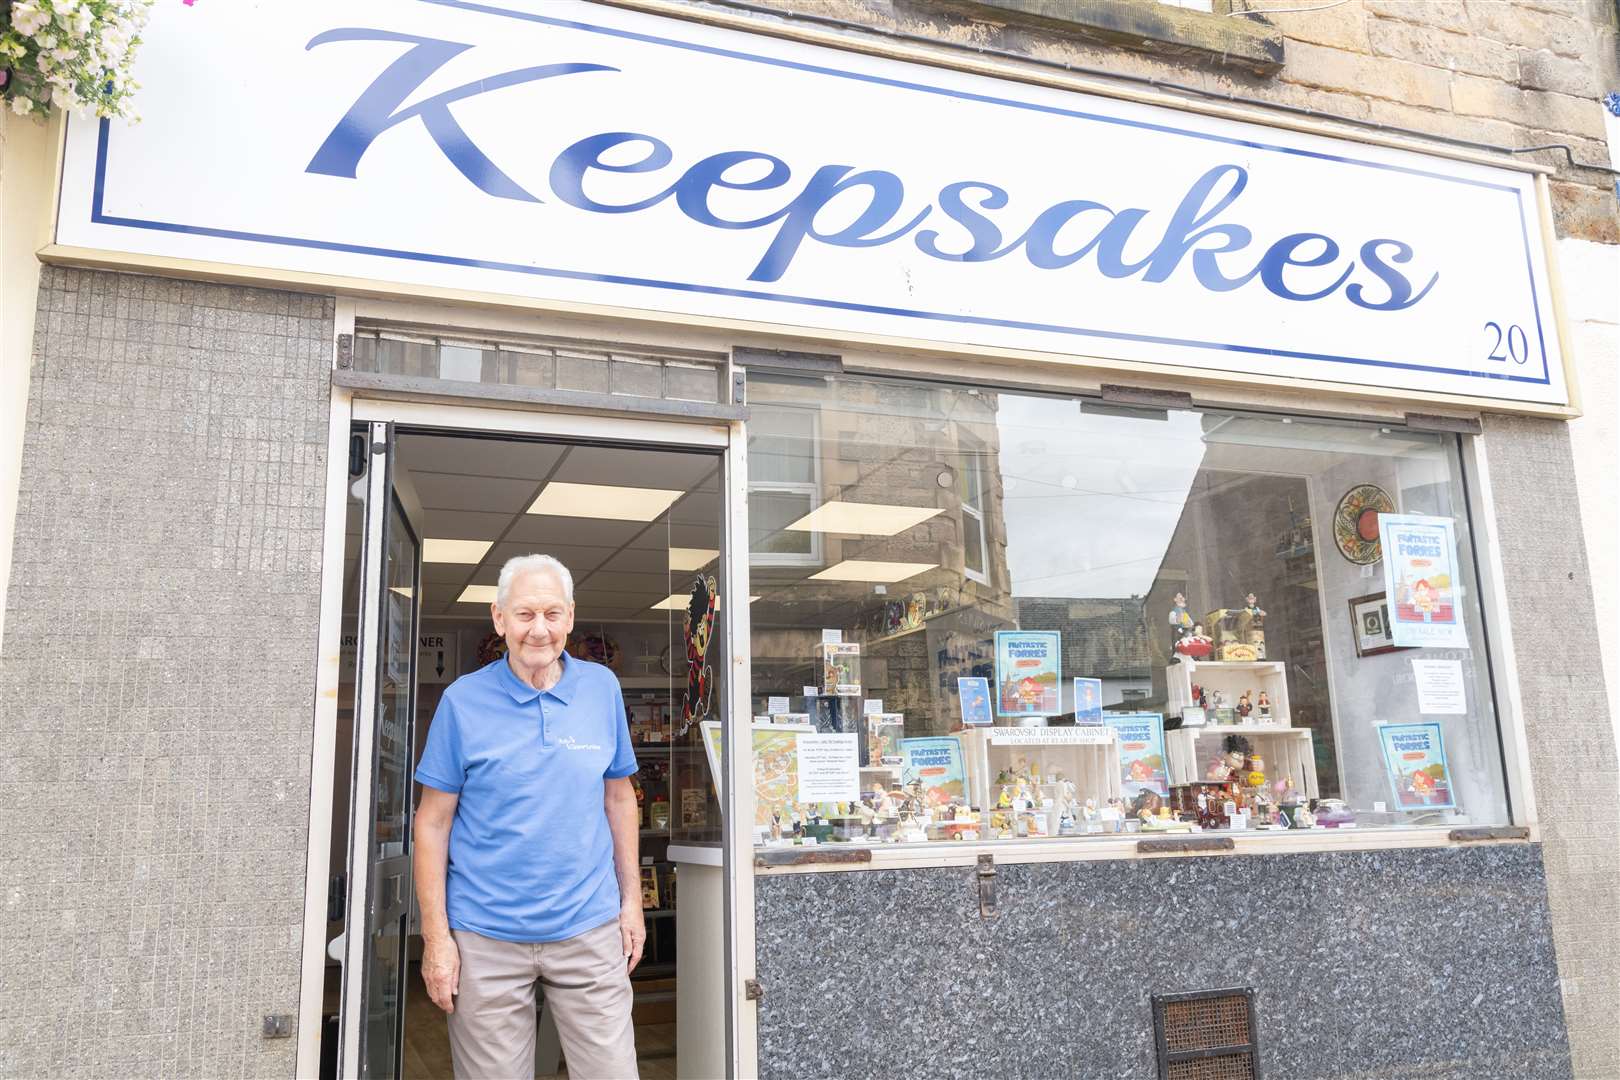 Ray and his new venture - a bric-a-brac shop at 20 High Street - that will support his charity.